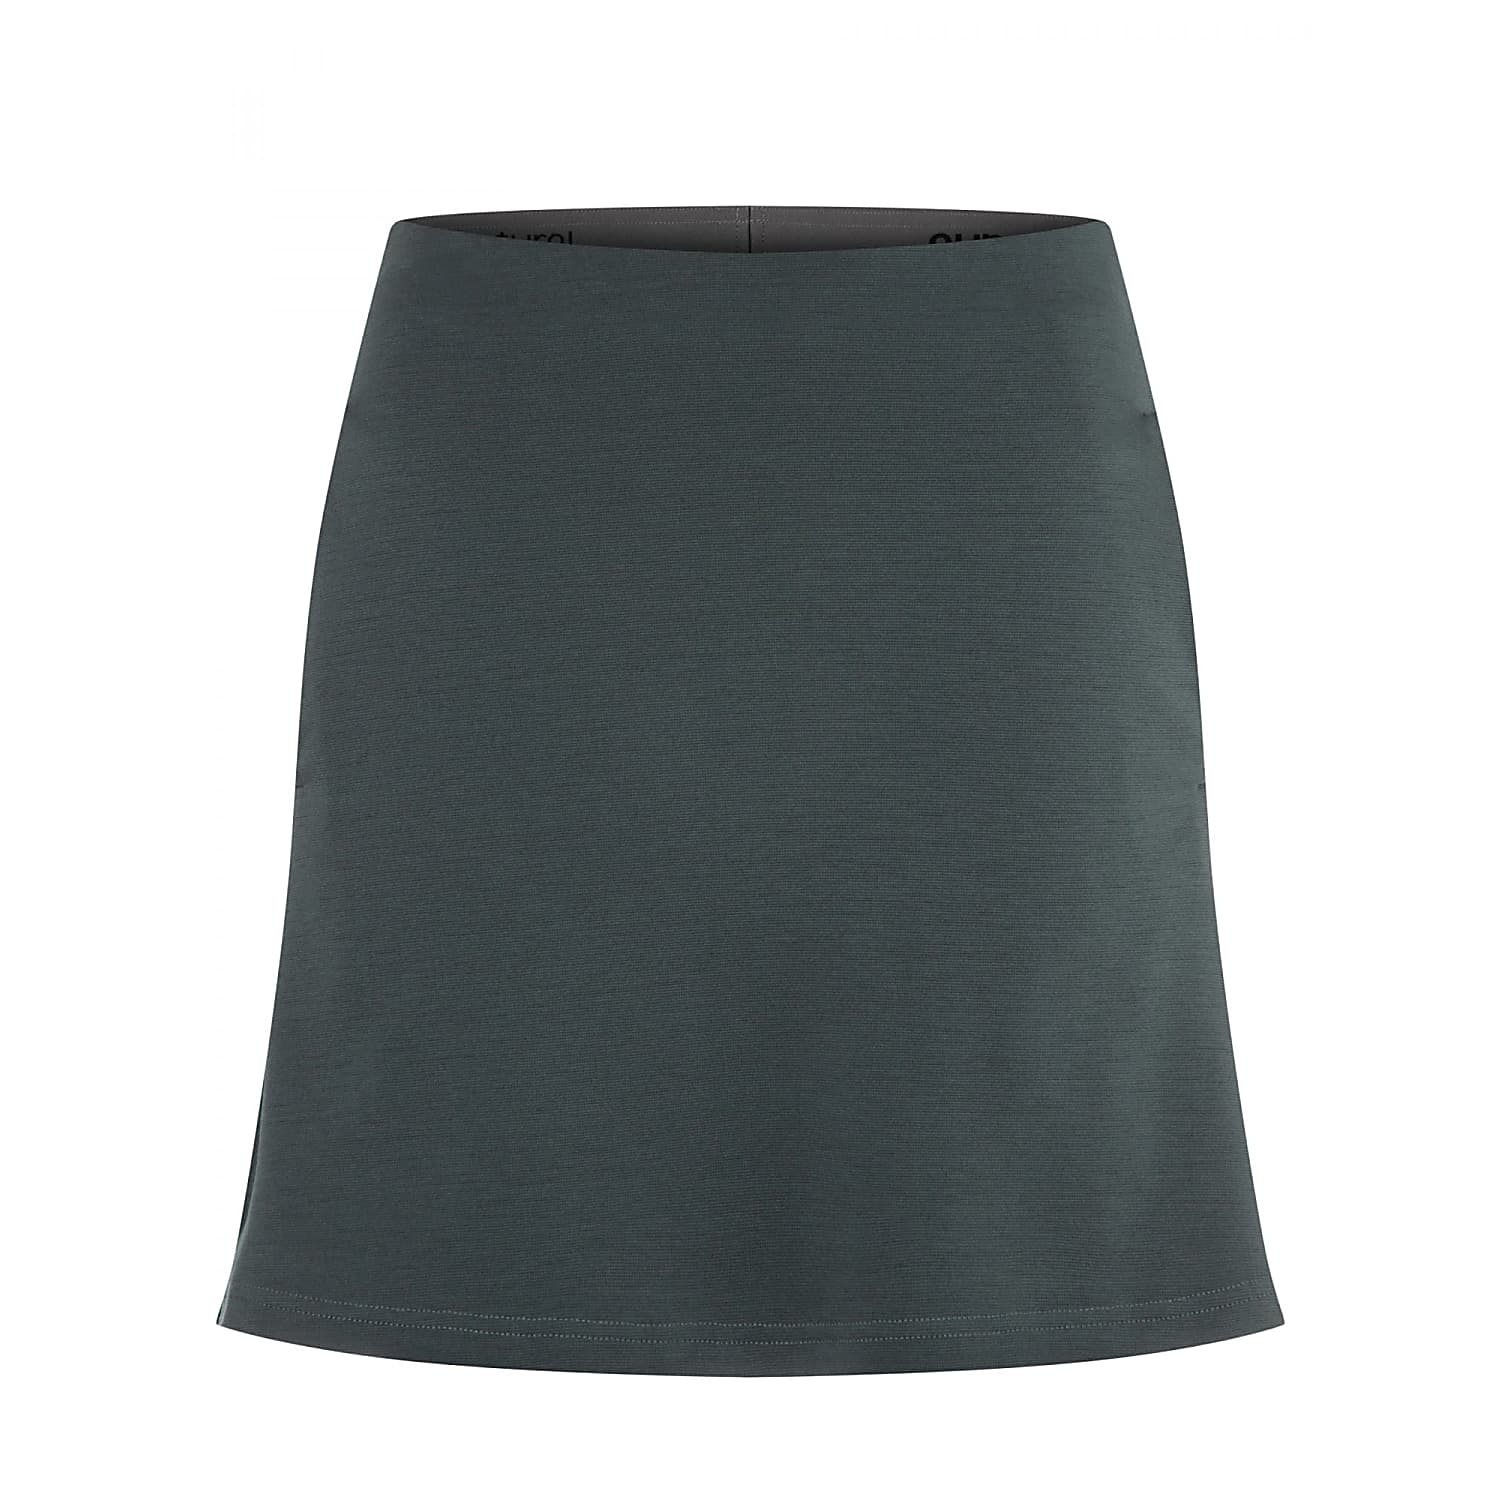 W Chic Super.Natural - cheap Urban SPORTY and Fast SKORT, shipping